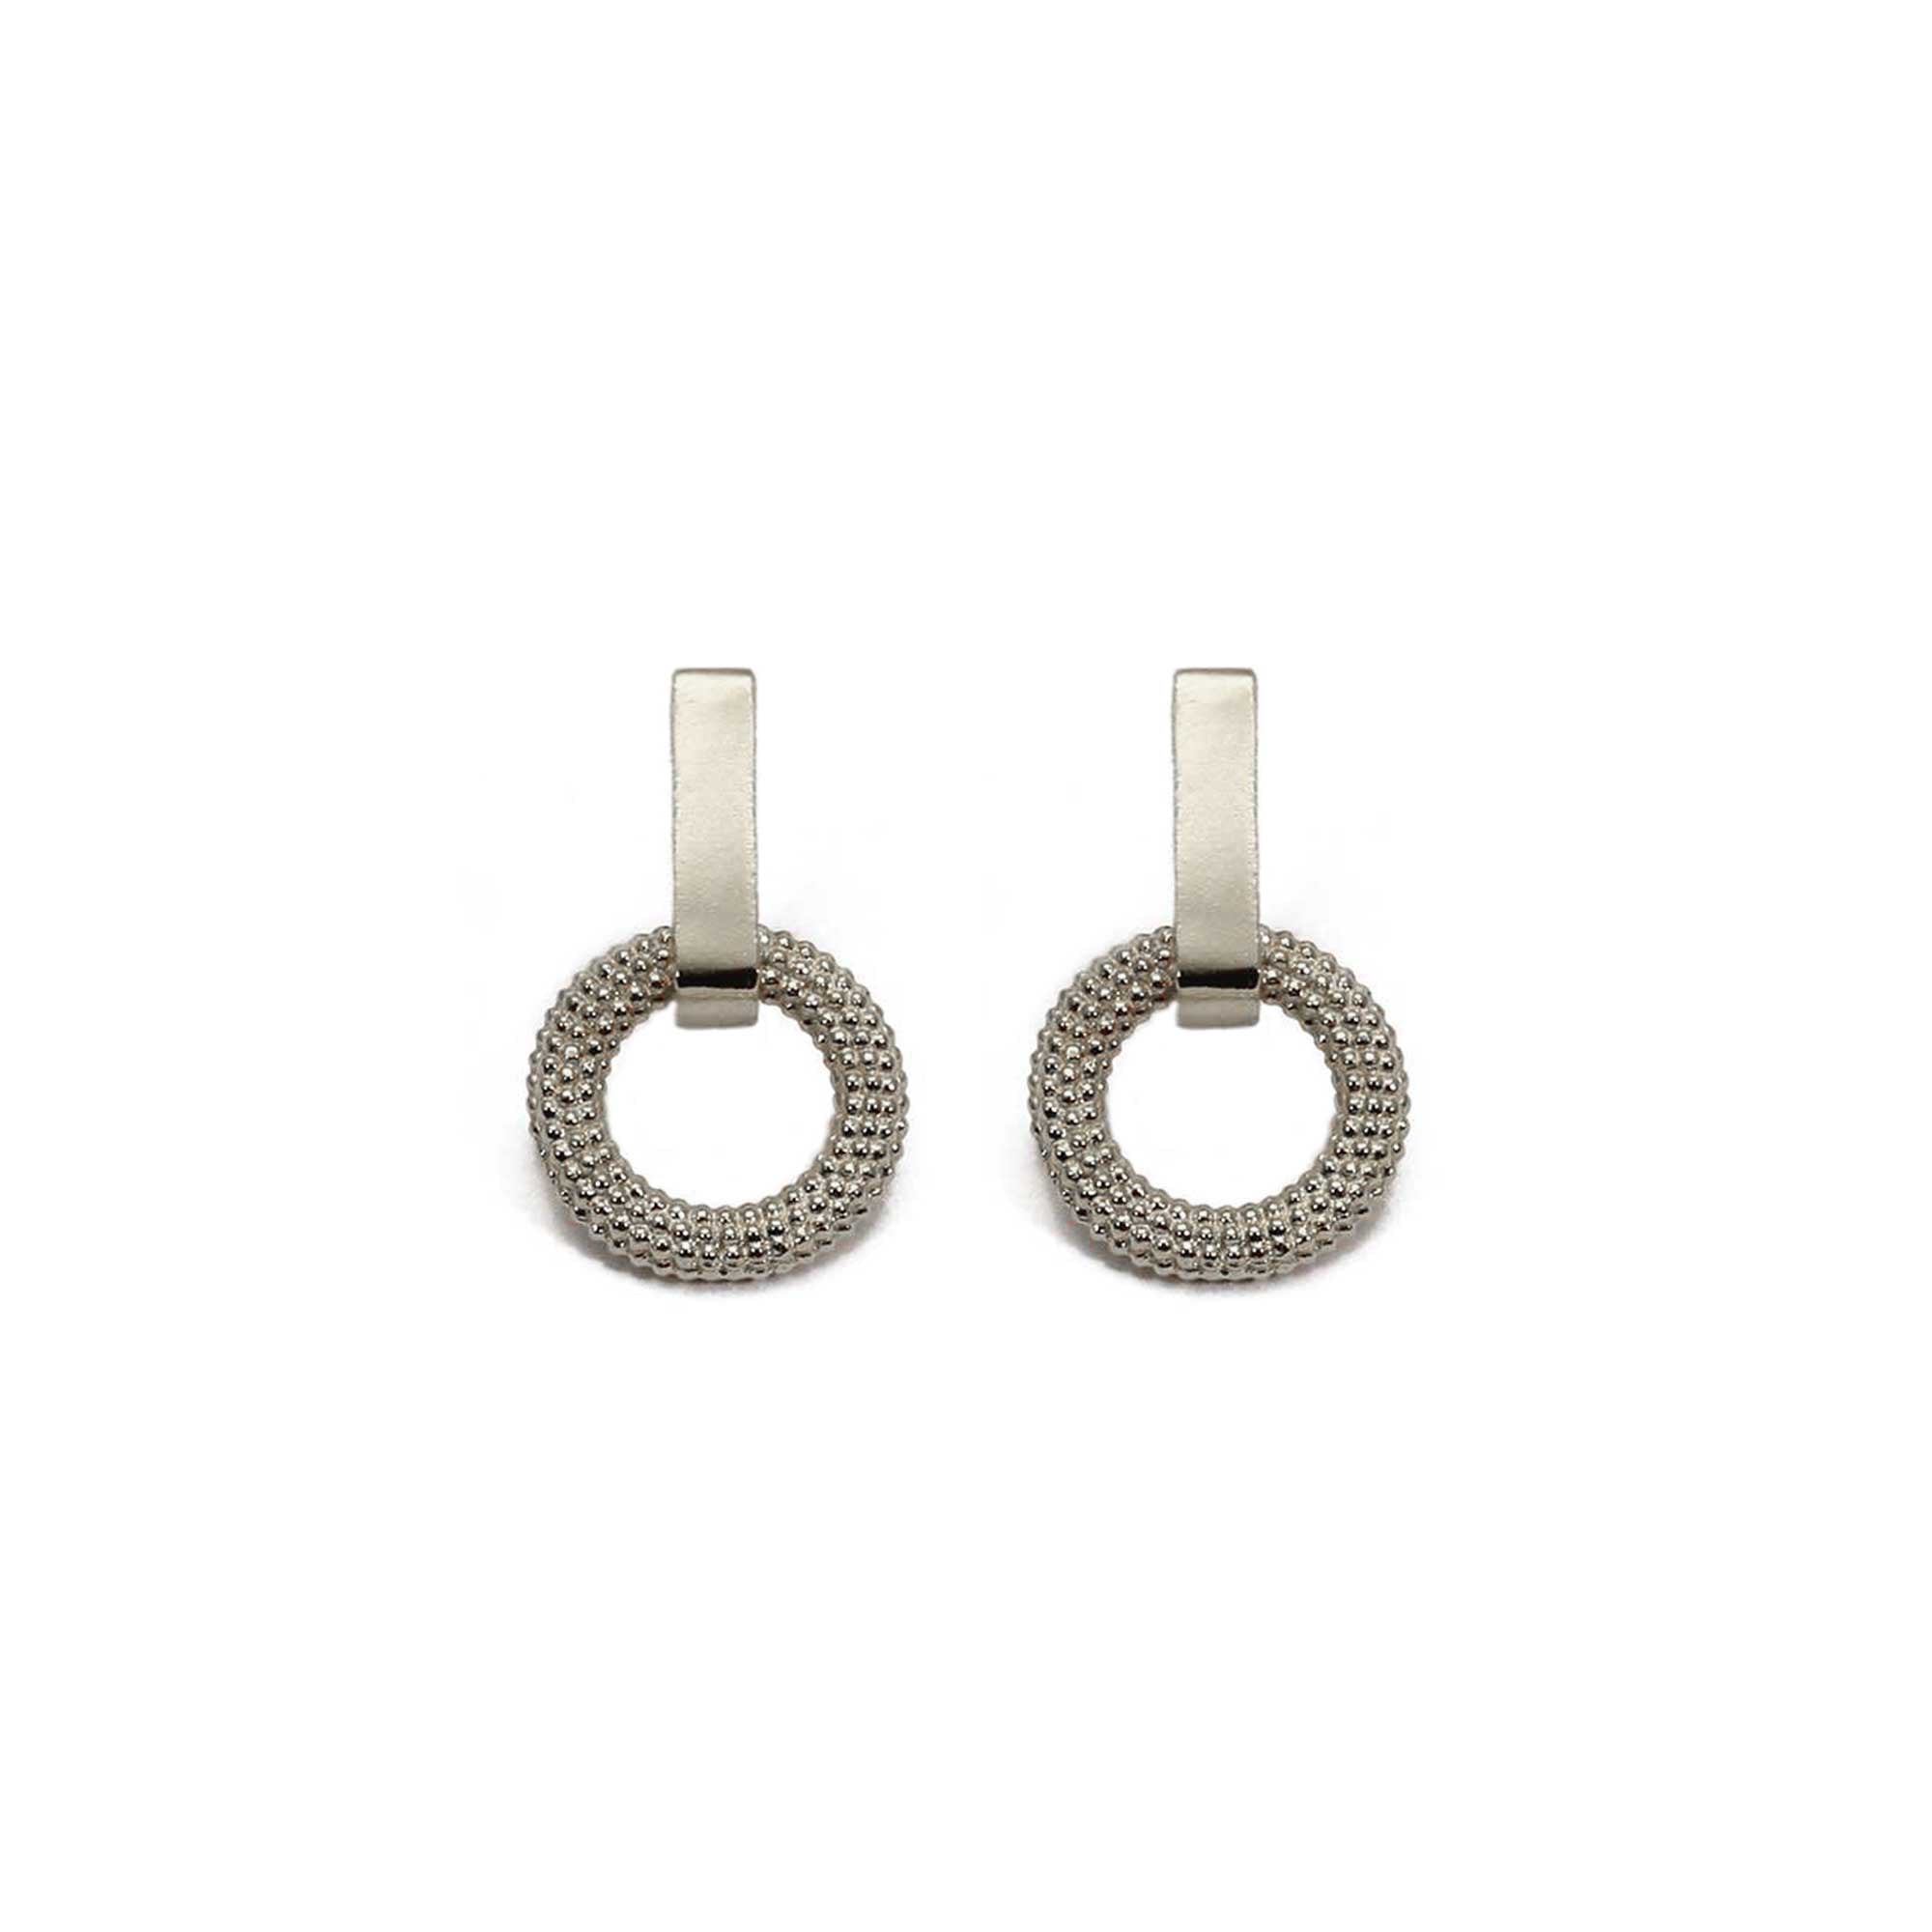 A pair of minimal silver small drop earrings